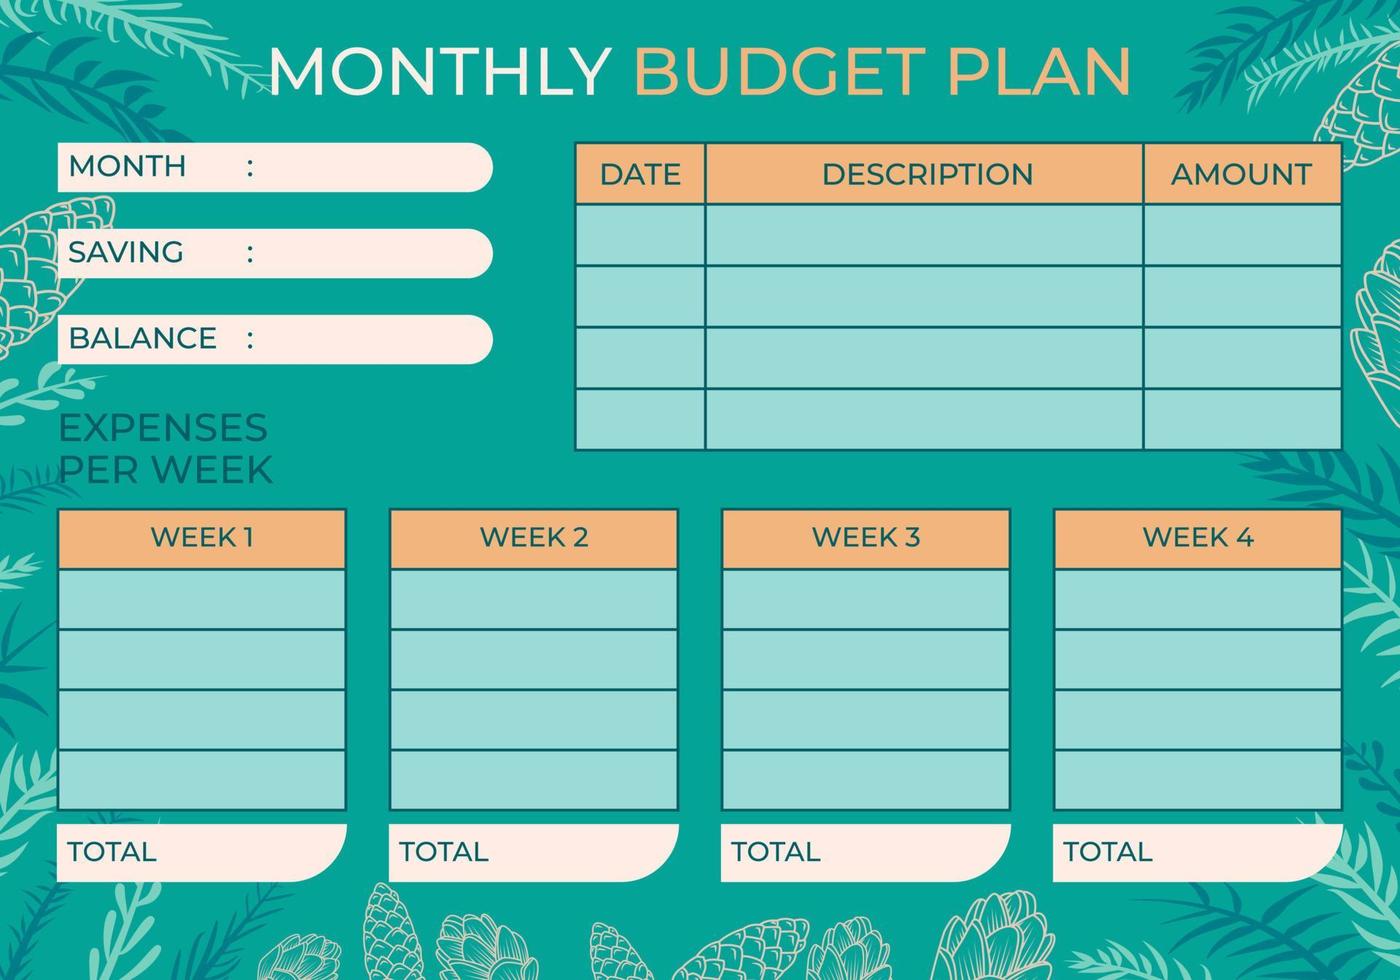 Vector illustration of monthly budget plan. Budget planning template.